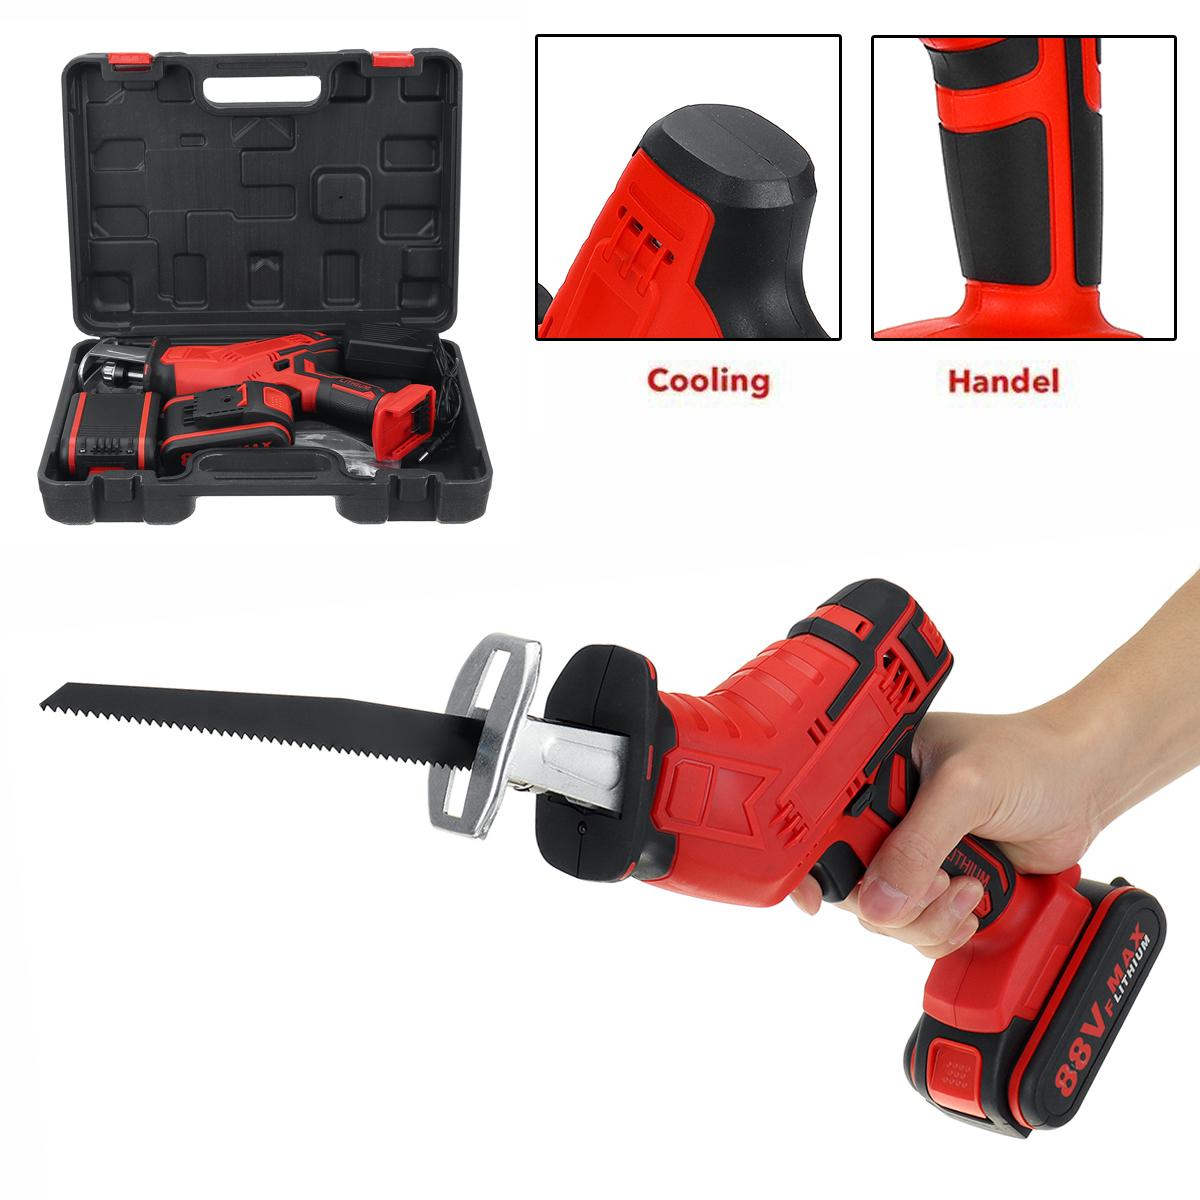 88VF-Electric-Reciprocating-Saw-Outdoor-Cordless-Portable-Saw-Woodworking-Cutter-1733463-10